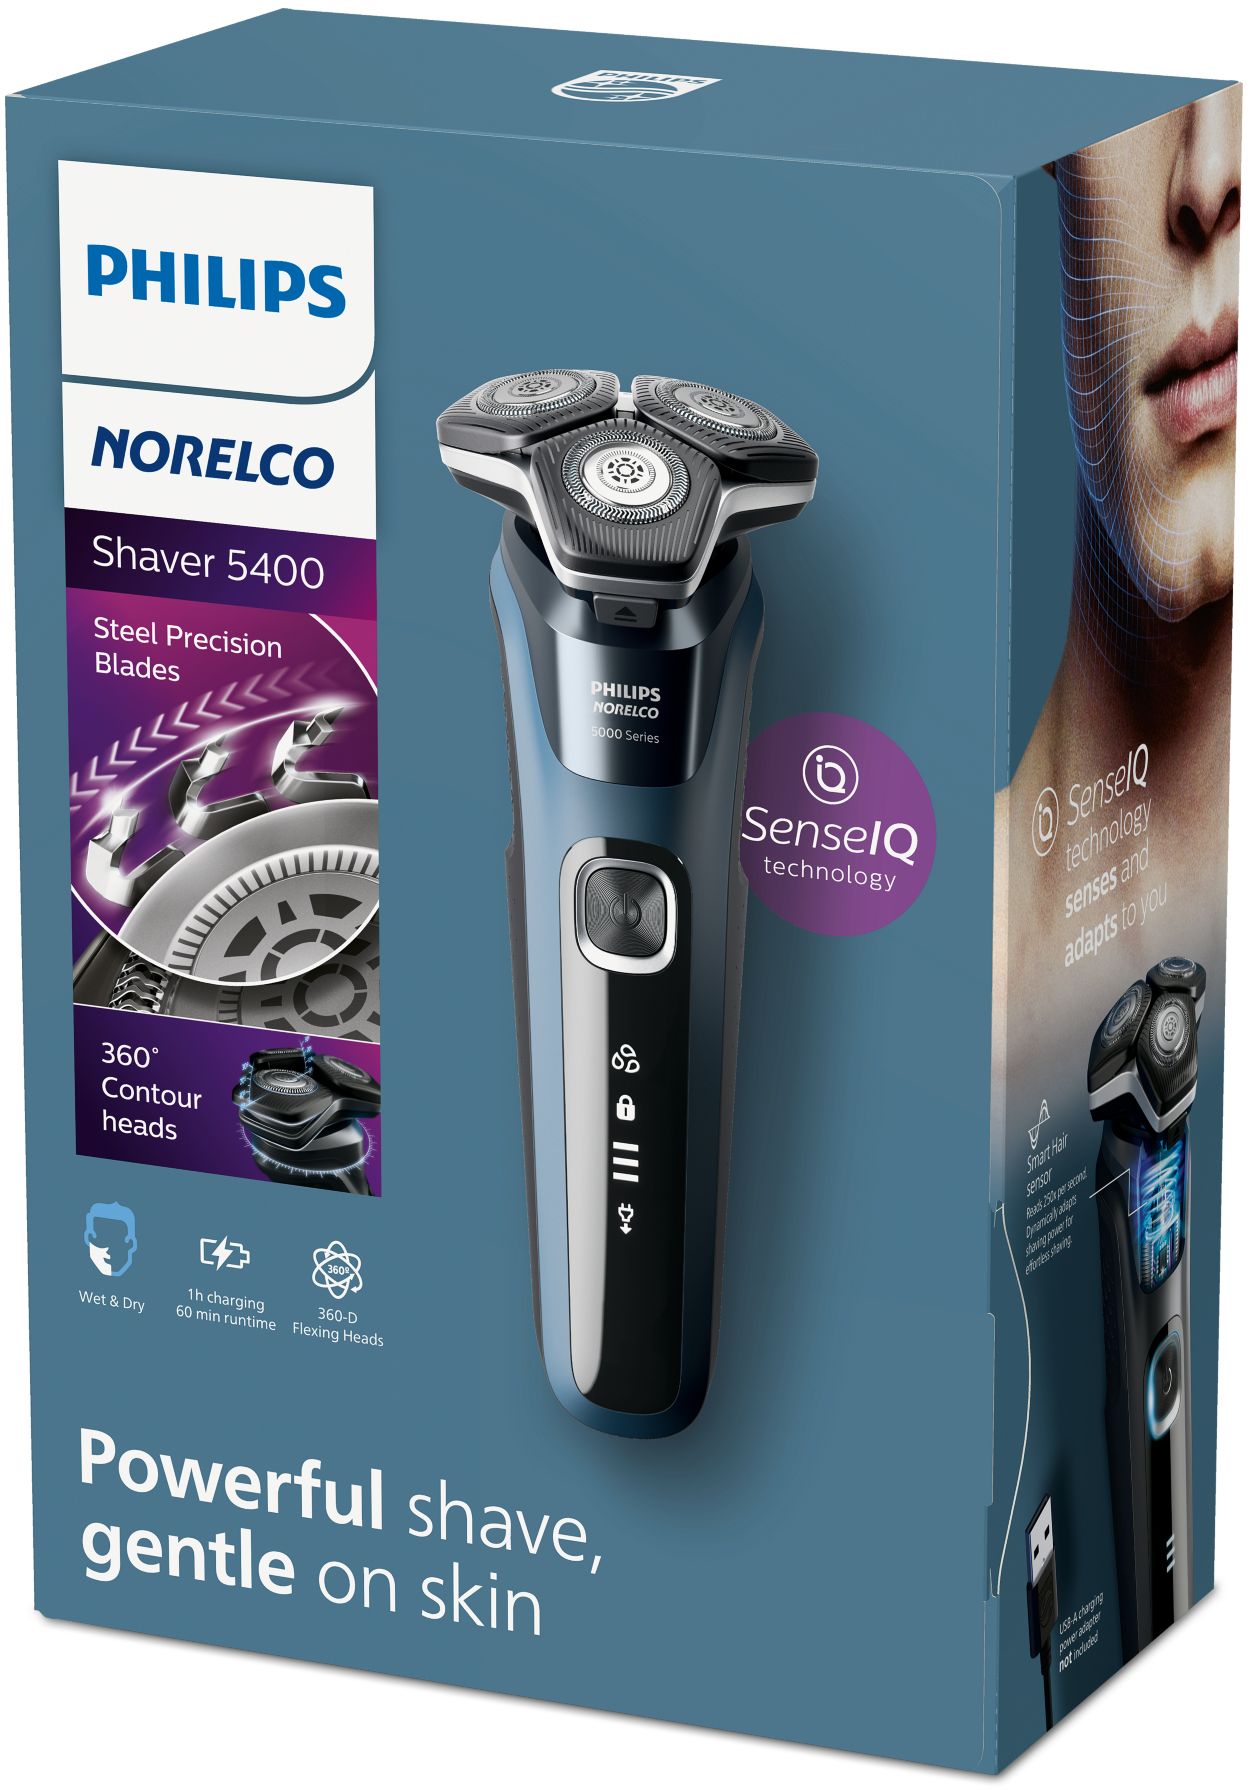 Wet & Dry electric shaver